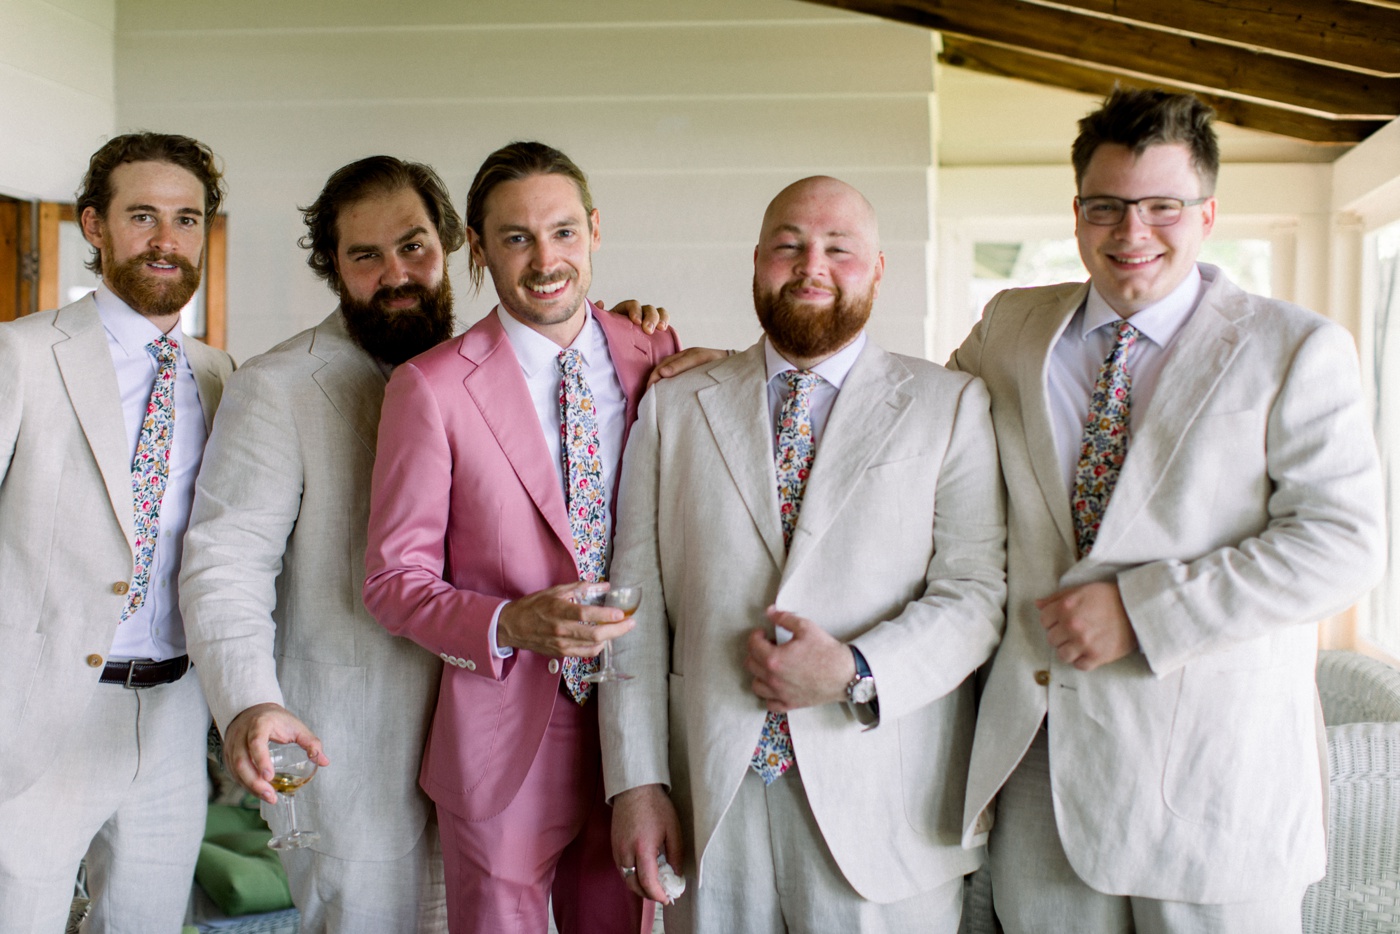 Groom wearing a pink suit with a floral necktie